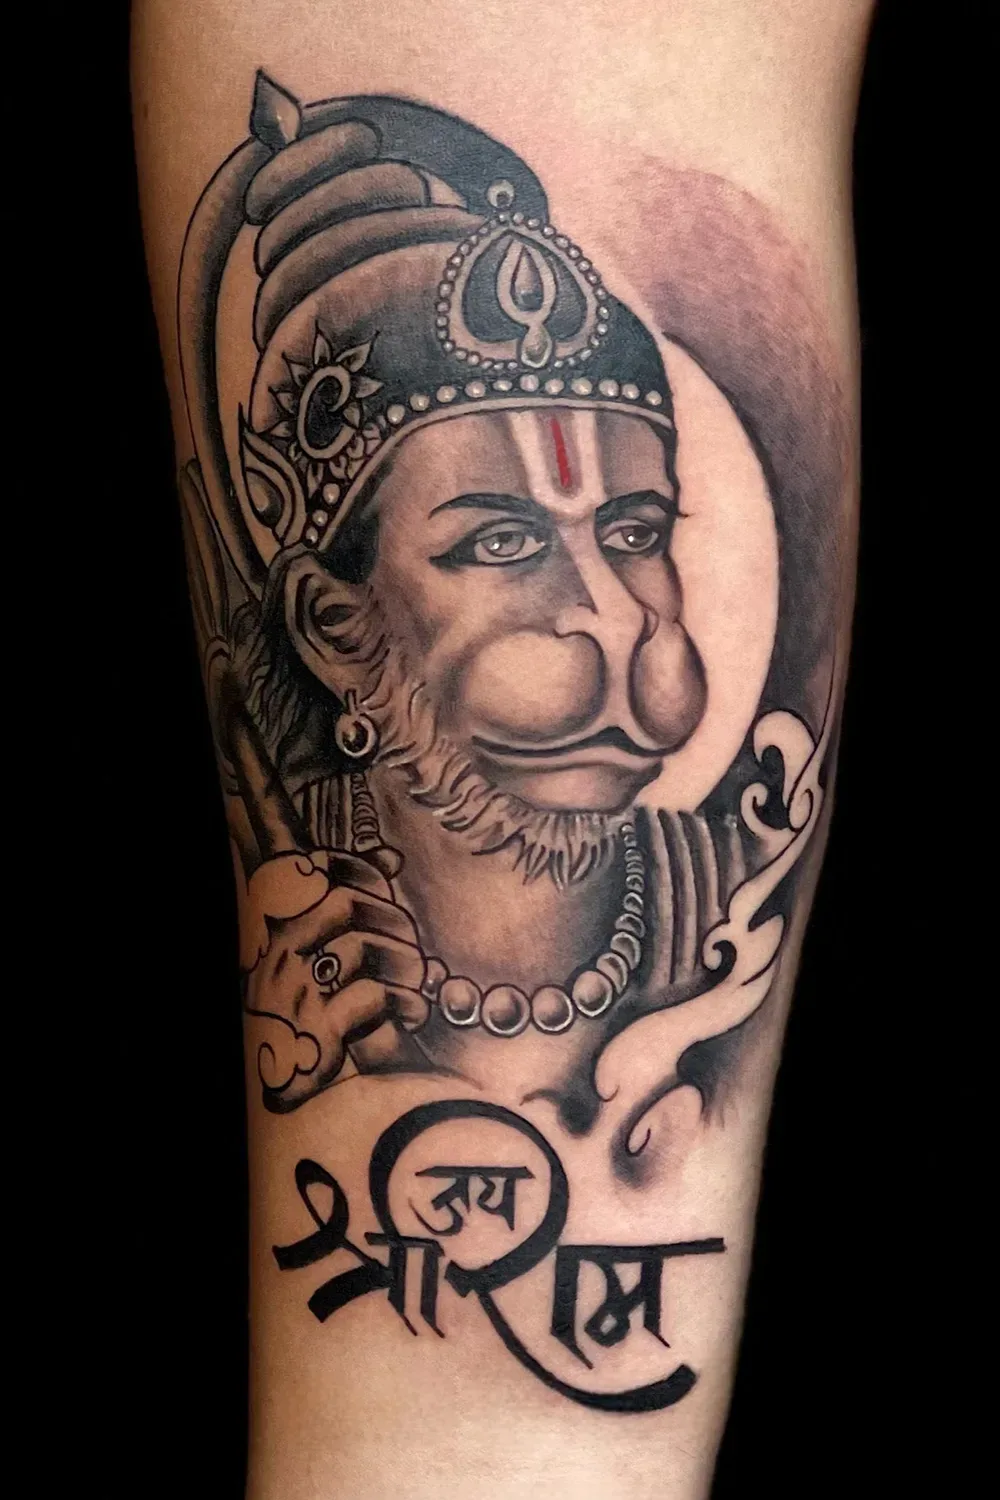 komstec Aai Baba With Ganesha Tattoo Temporary Tattoo For Male And Female  Tattoo - Price in India, Buy komstec Aai Baba With Ganesha Tattoo Temporary  Tattoo For Male And Female Tattoo Online